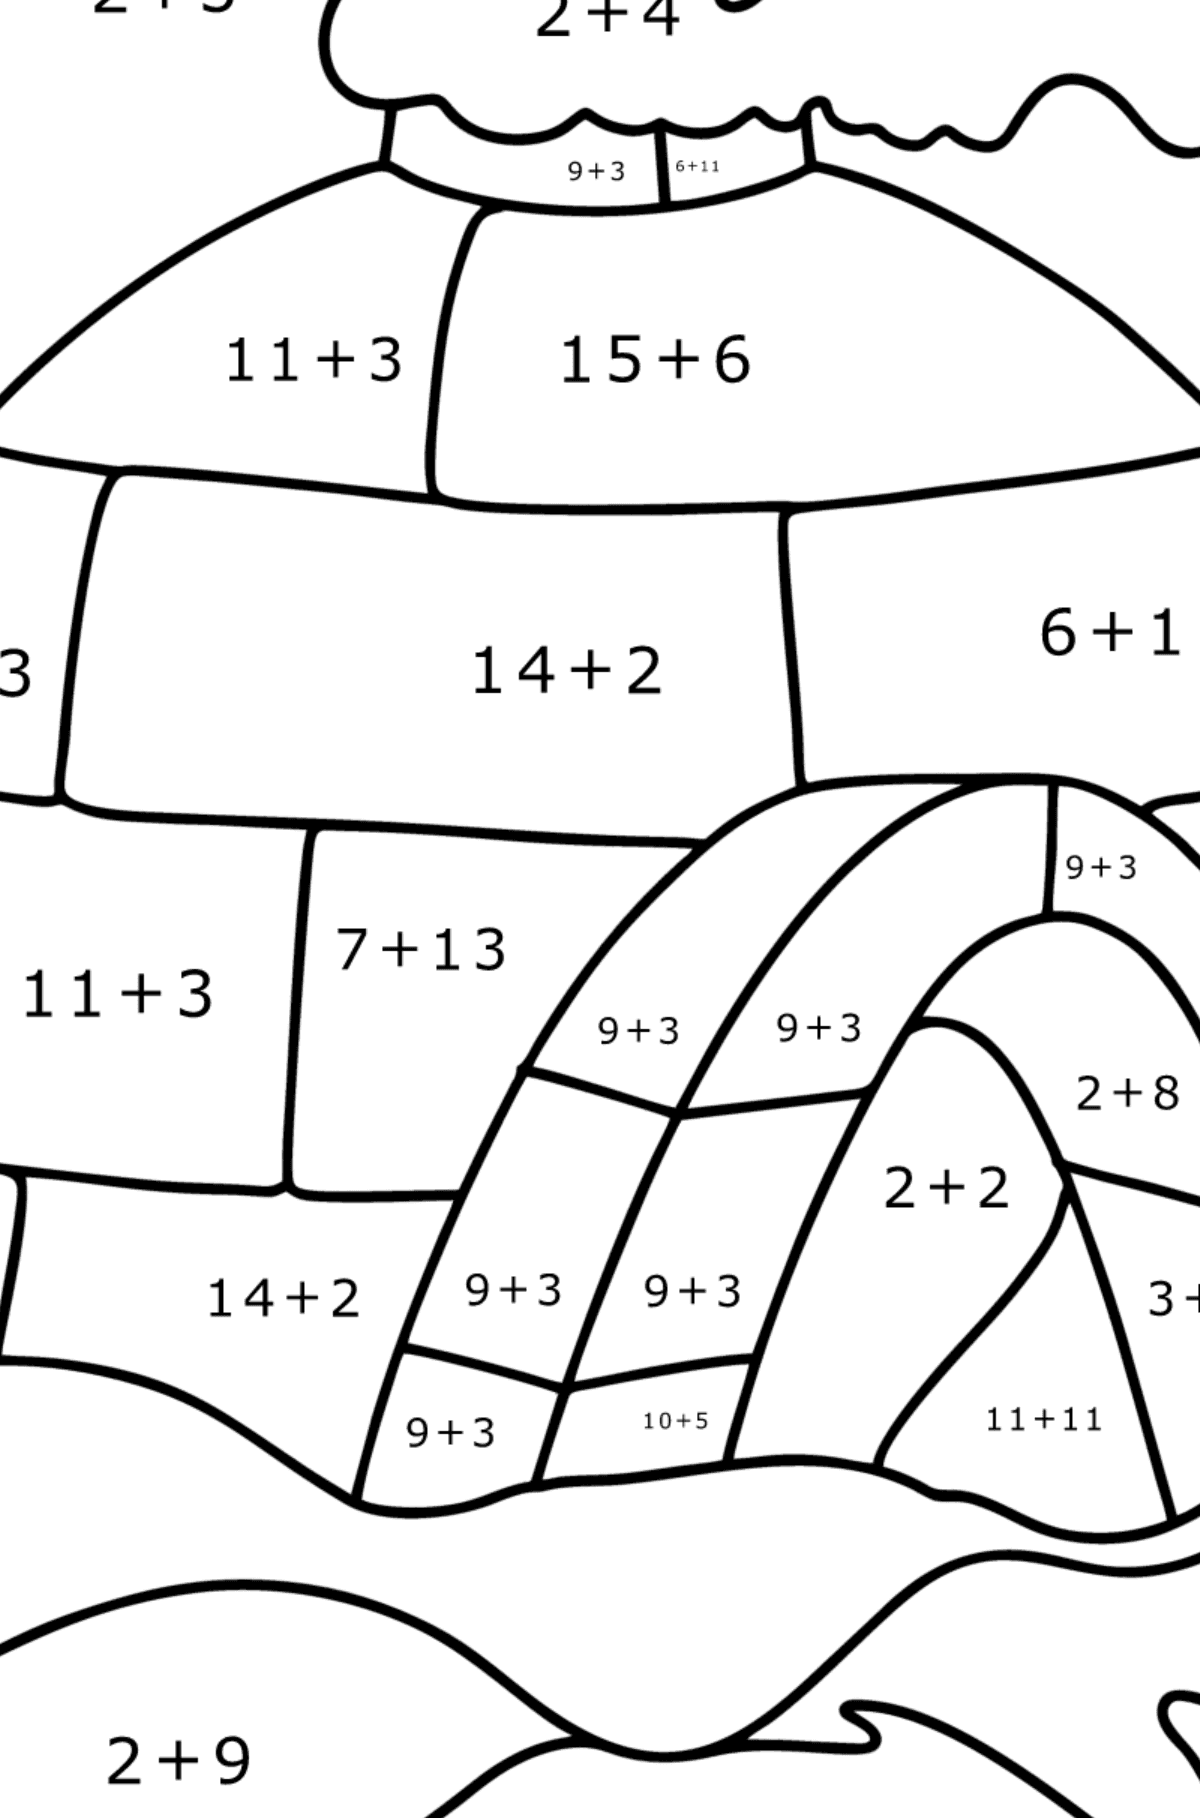 Igloo ice House coloring page - Math Coloring - Addition for Kids